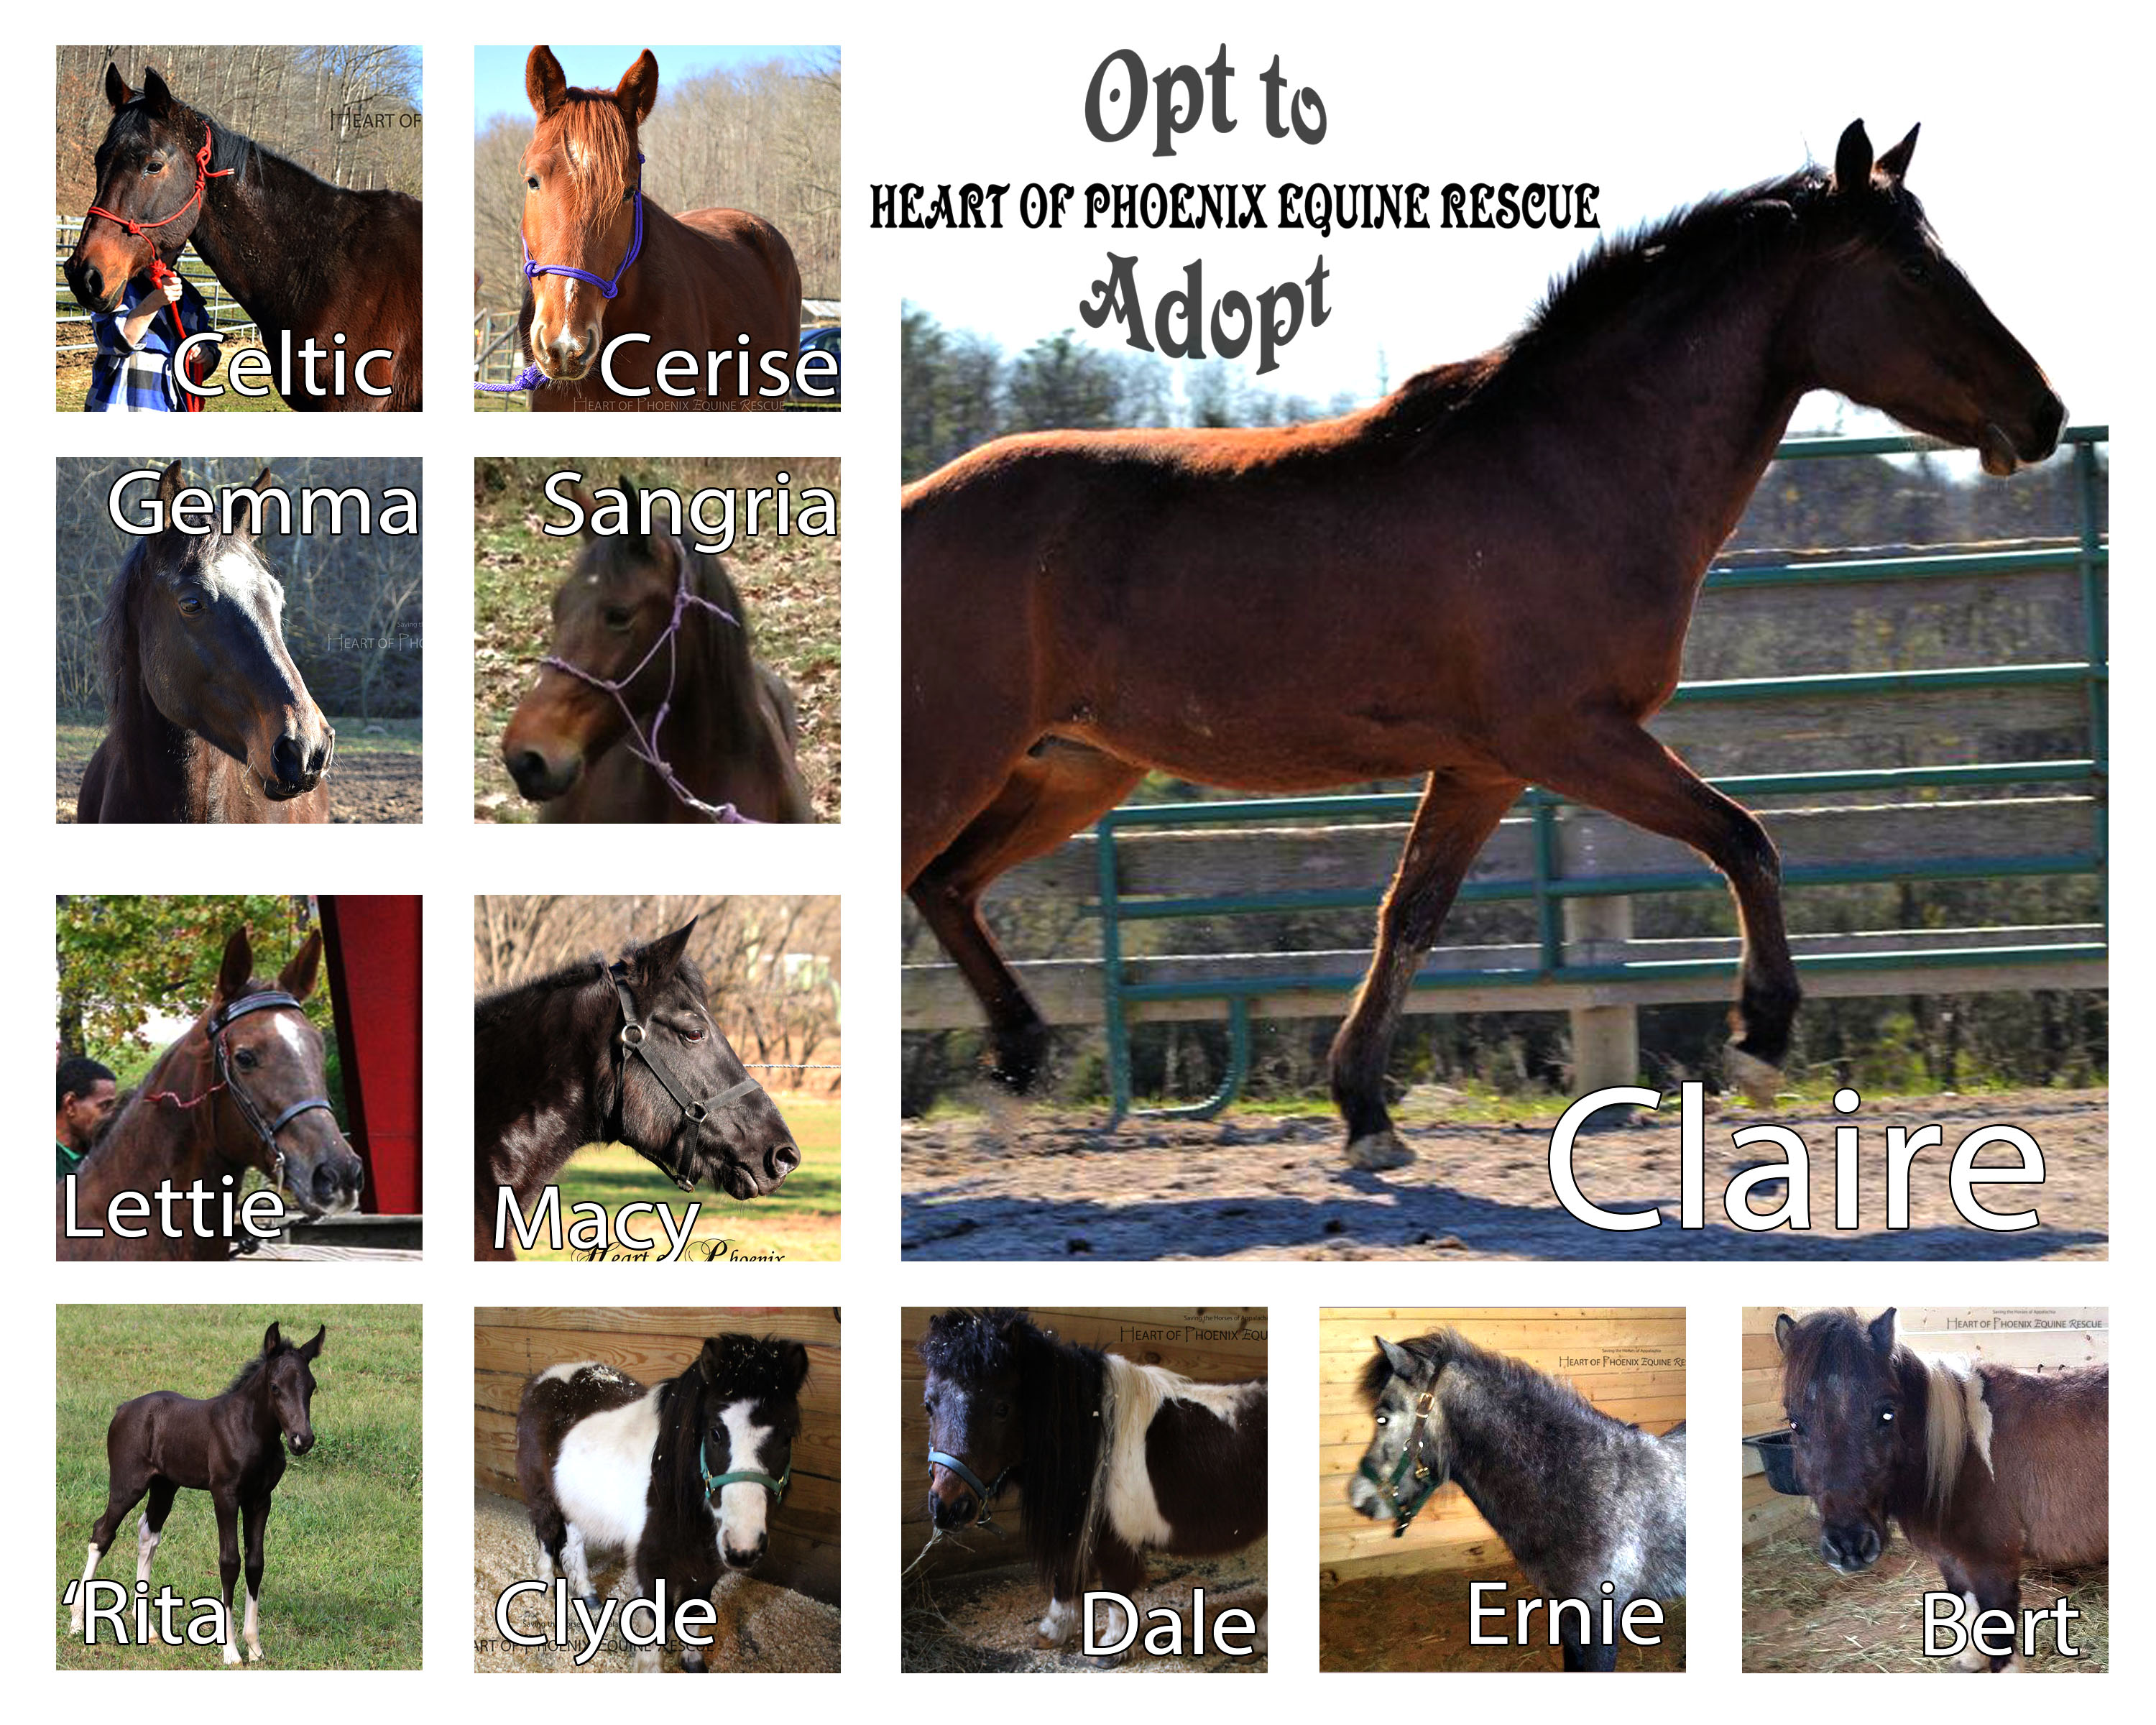 Safe Horses of Heart of Phoenix: An Image Gallery